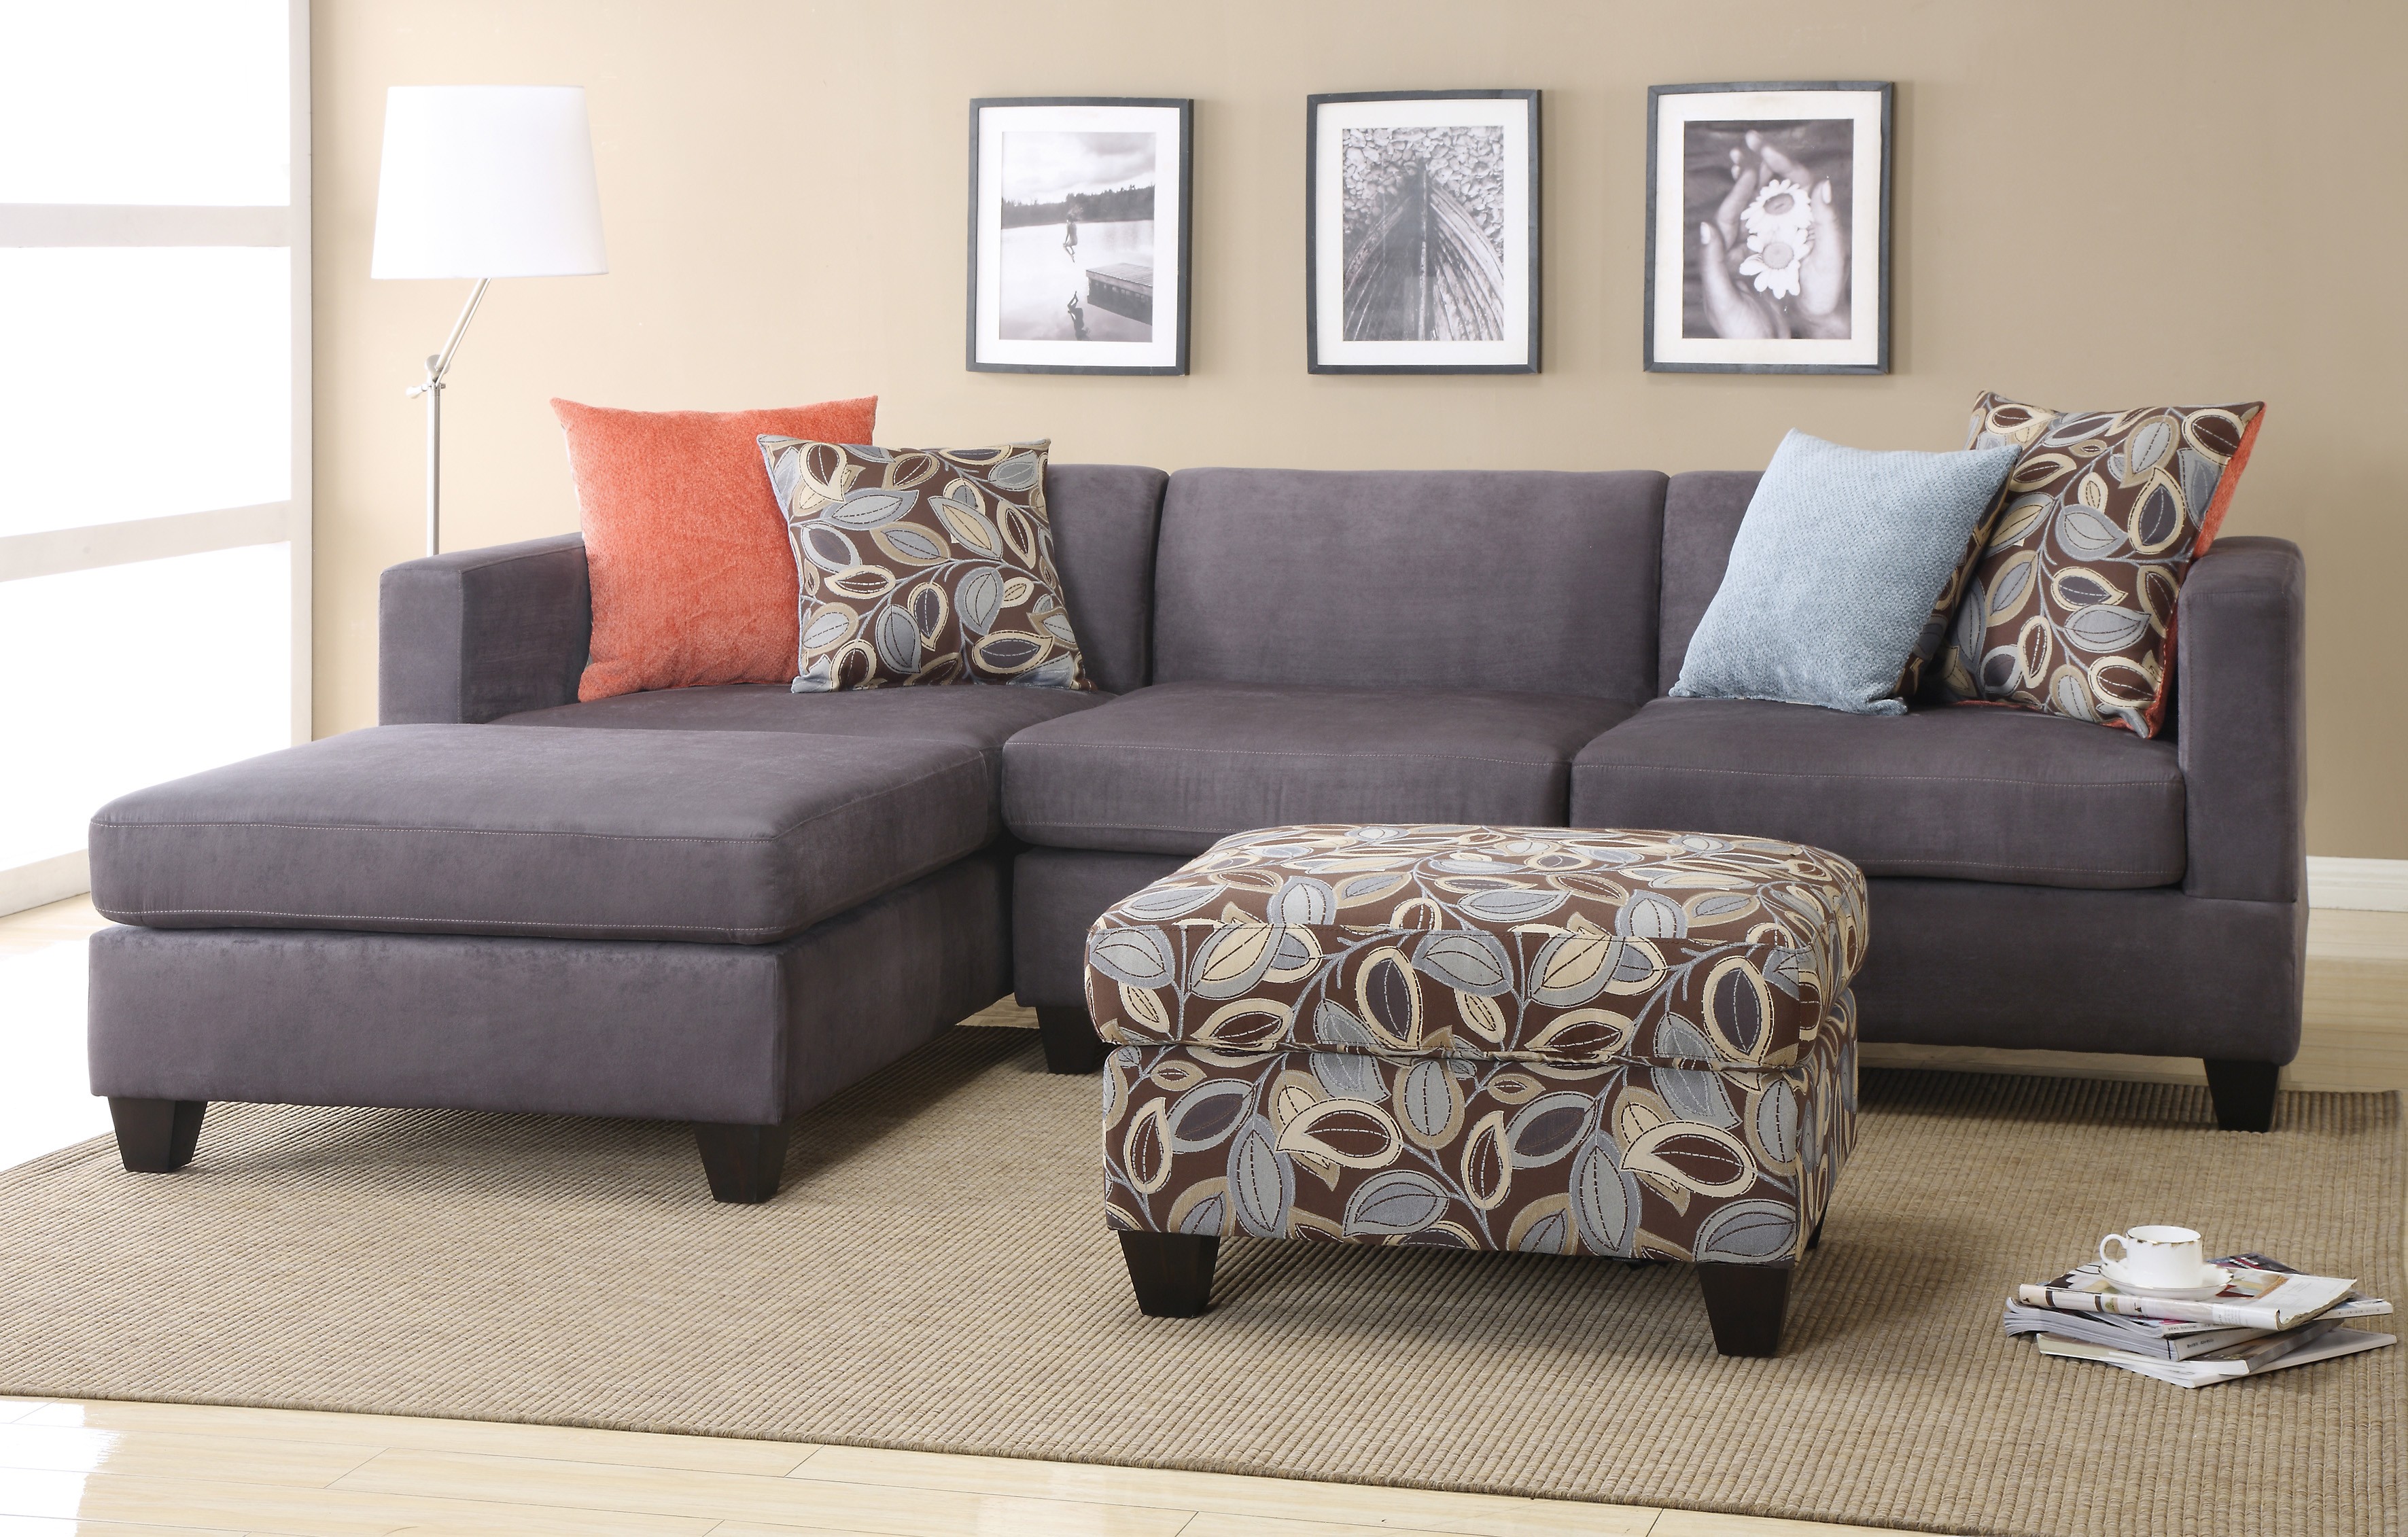 2 Piece Sectional Sofa with Chaise Design HomesFeed